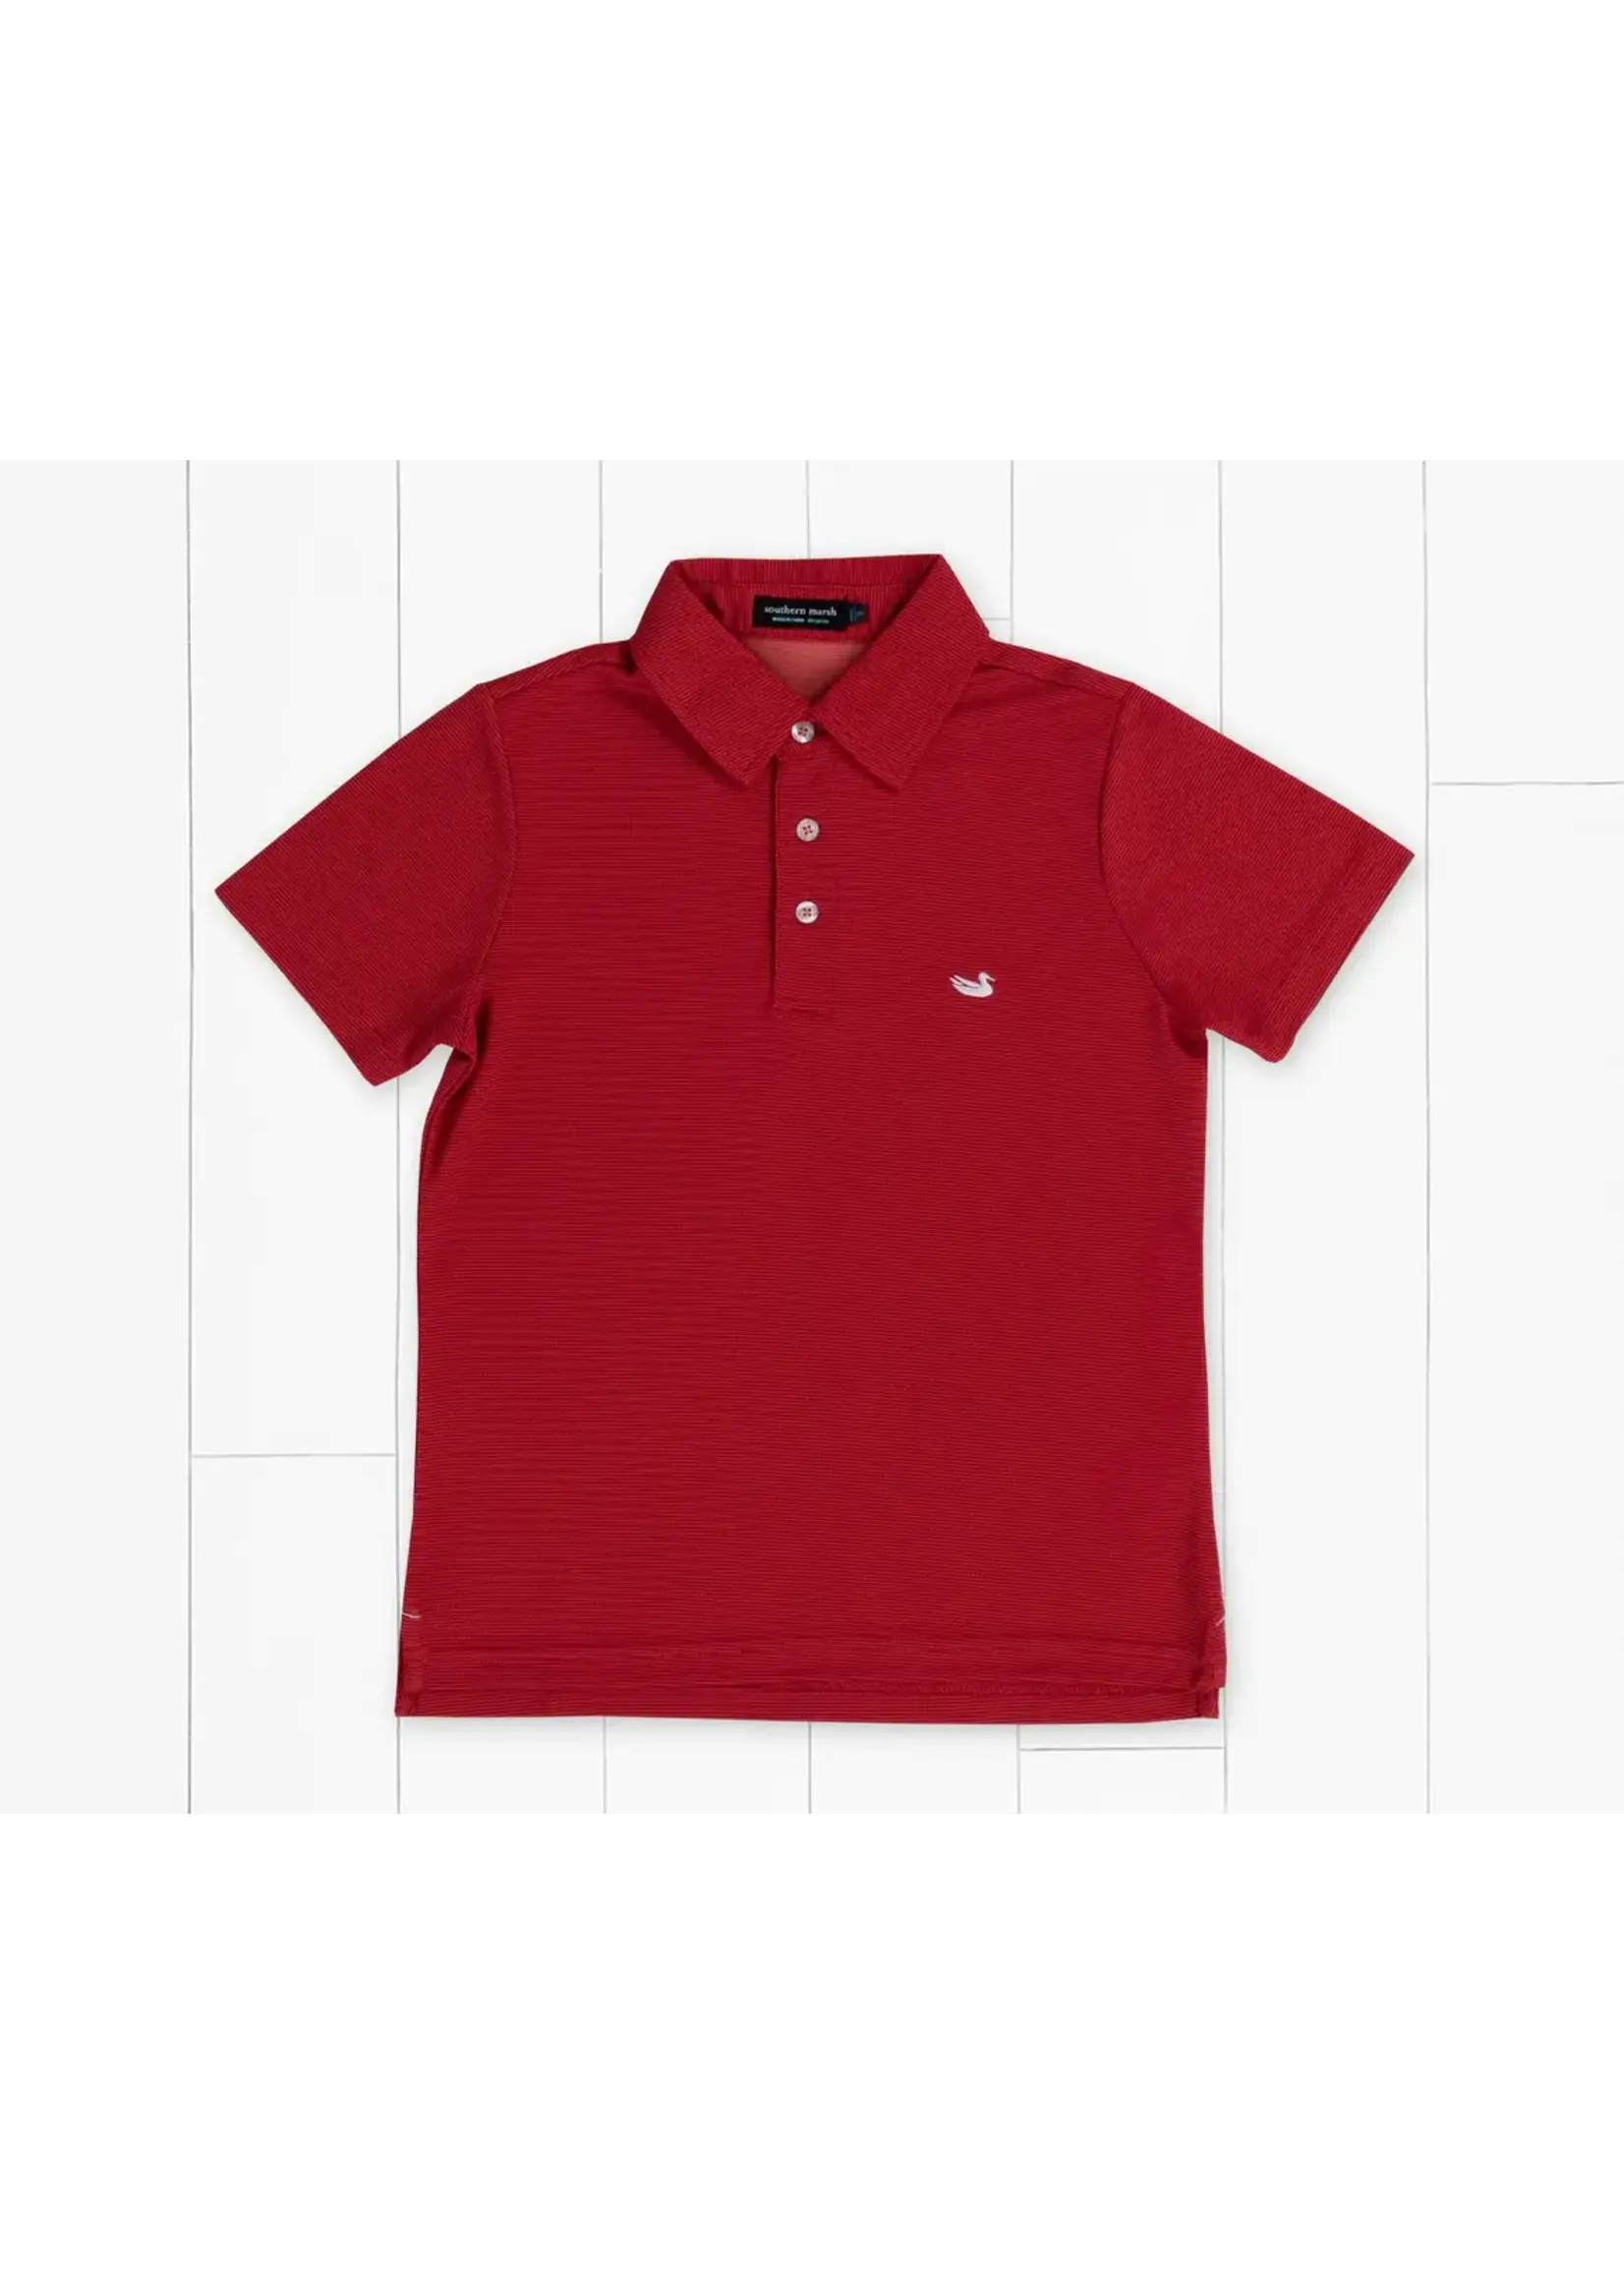 Southern Marsh Youth Abaco Mesh Performance Polo